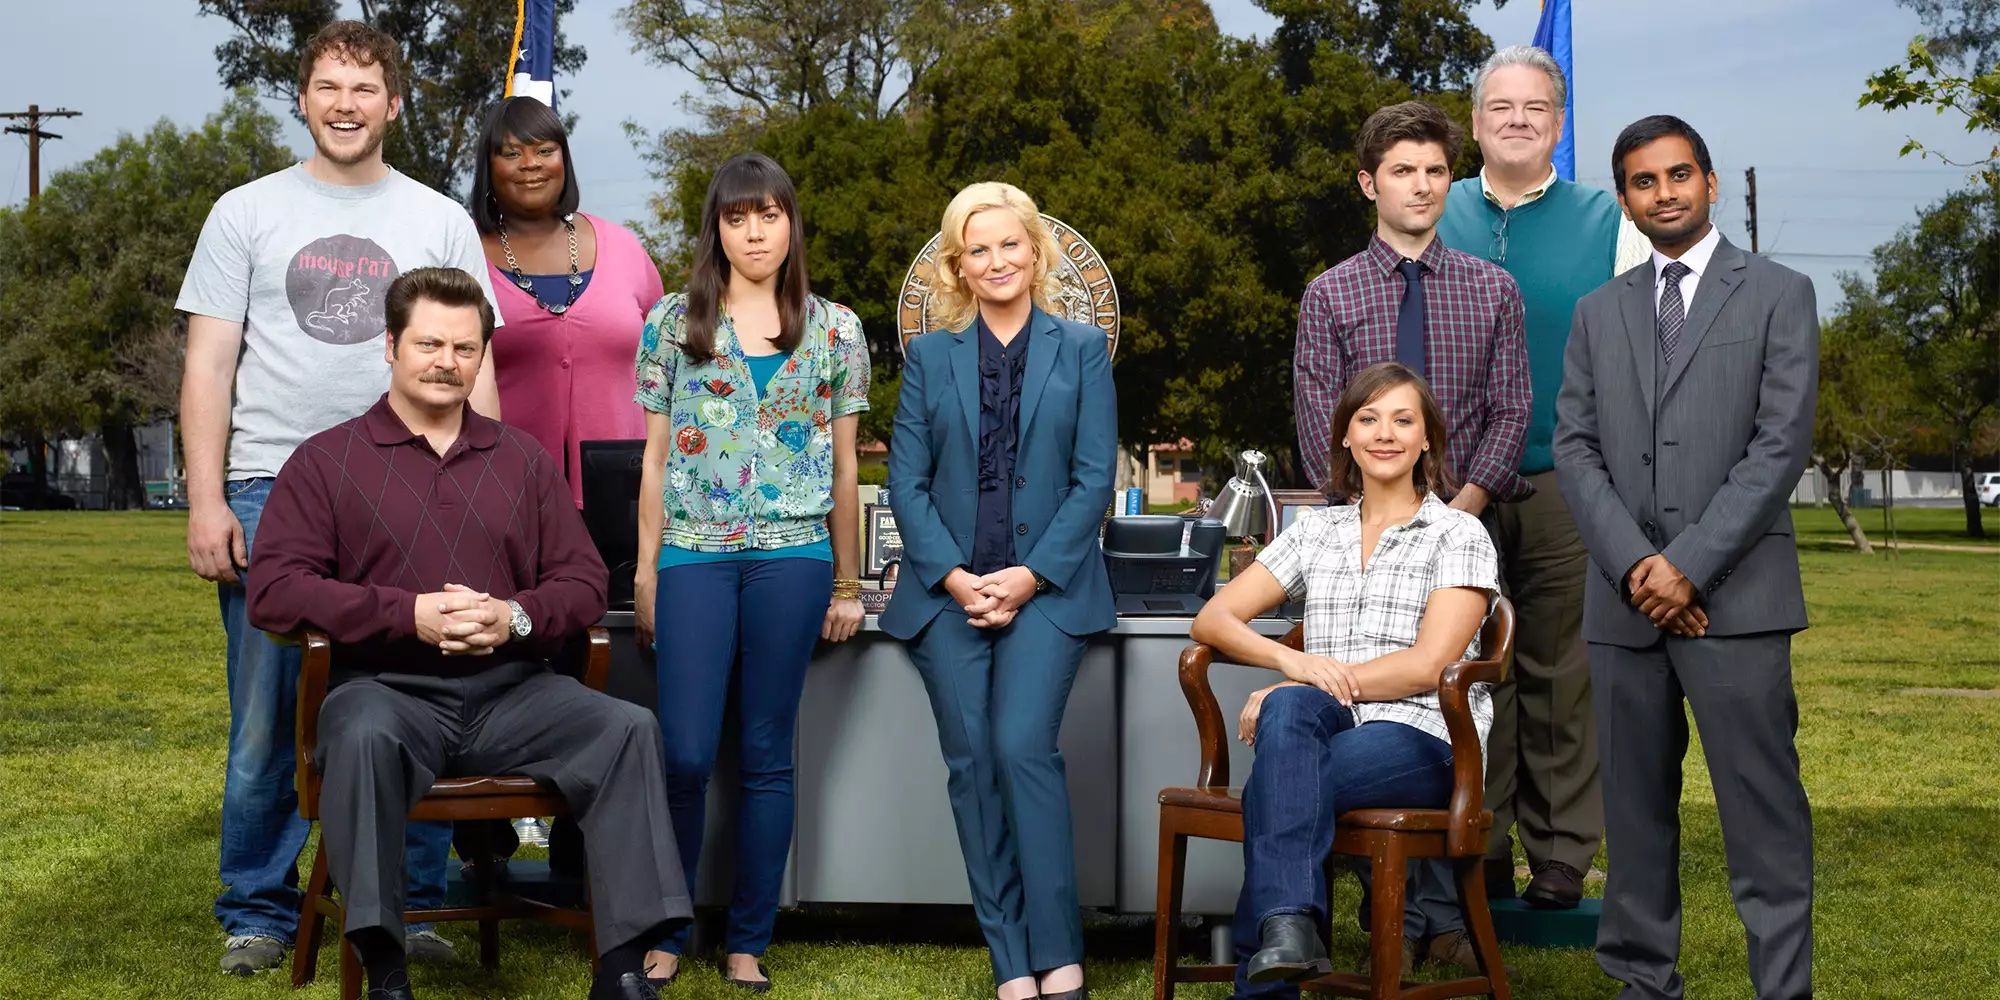 The cast of NBC's 'Parks and Recreation' pose in the park.